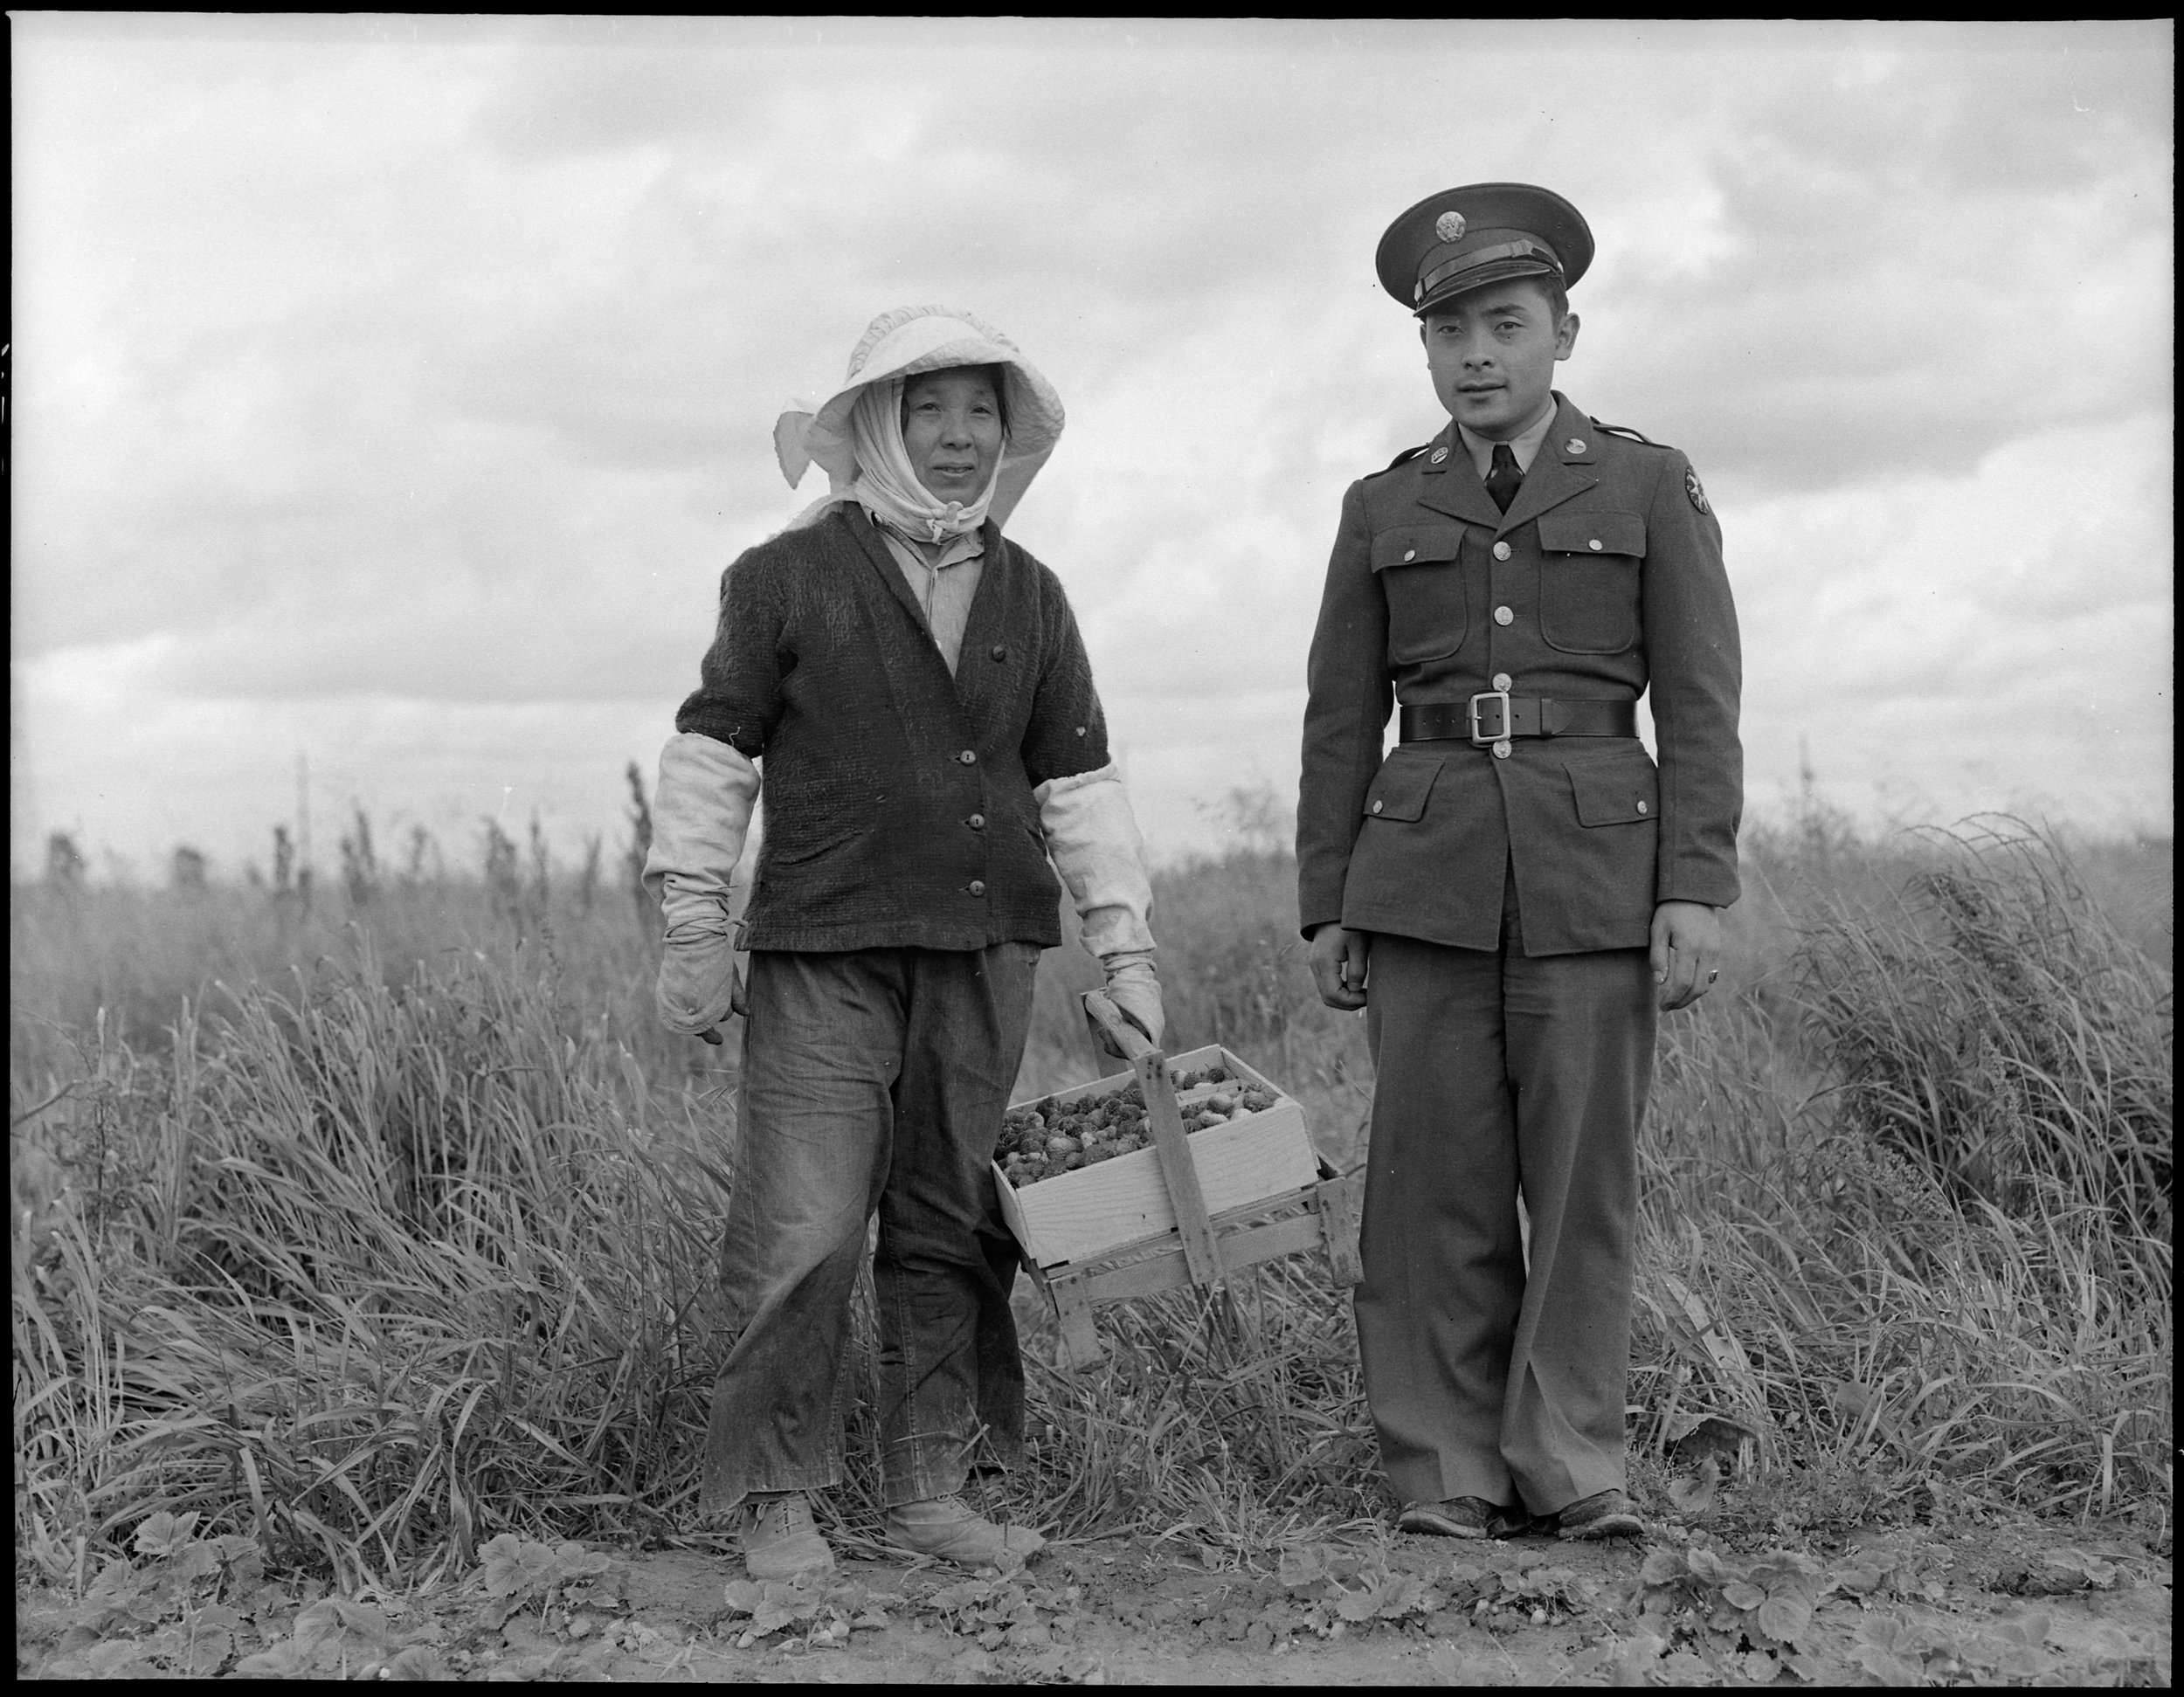  Florin, Sacramento County, California. A soldier and his mother in a strawberry field. The soldier, age 23, volunteered July 10, 1941, and is stationed at Camp Leonard Wood, Missouri. He was furloughed to help his mother and family prepare for their